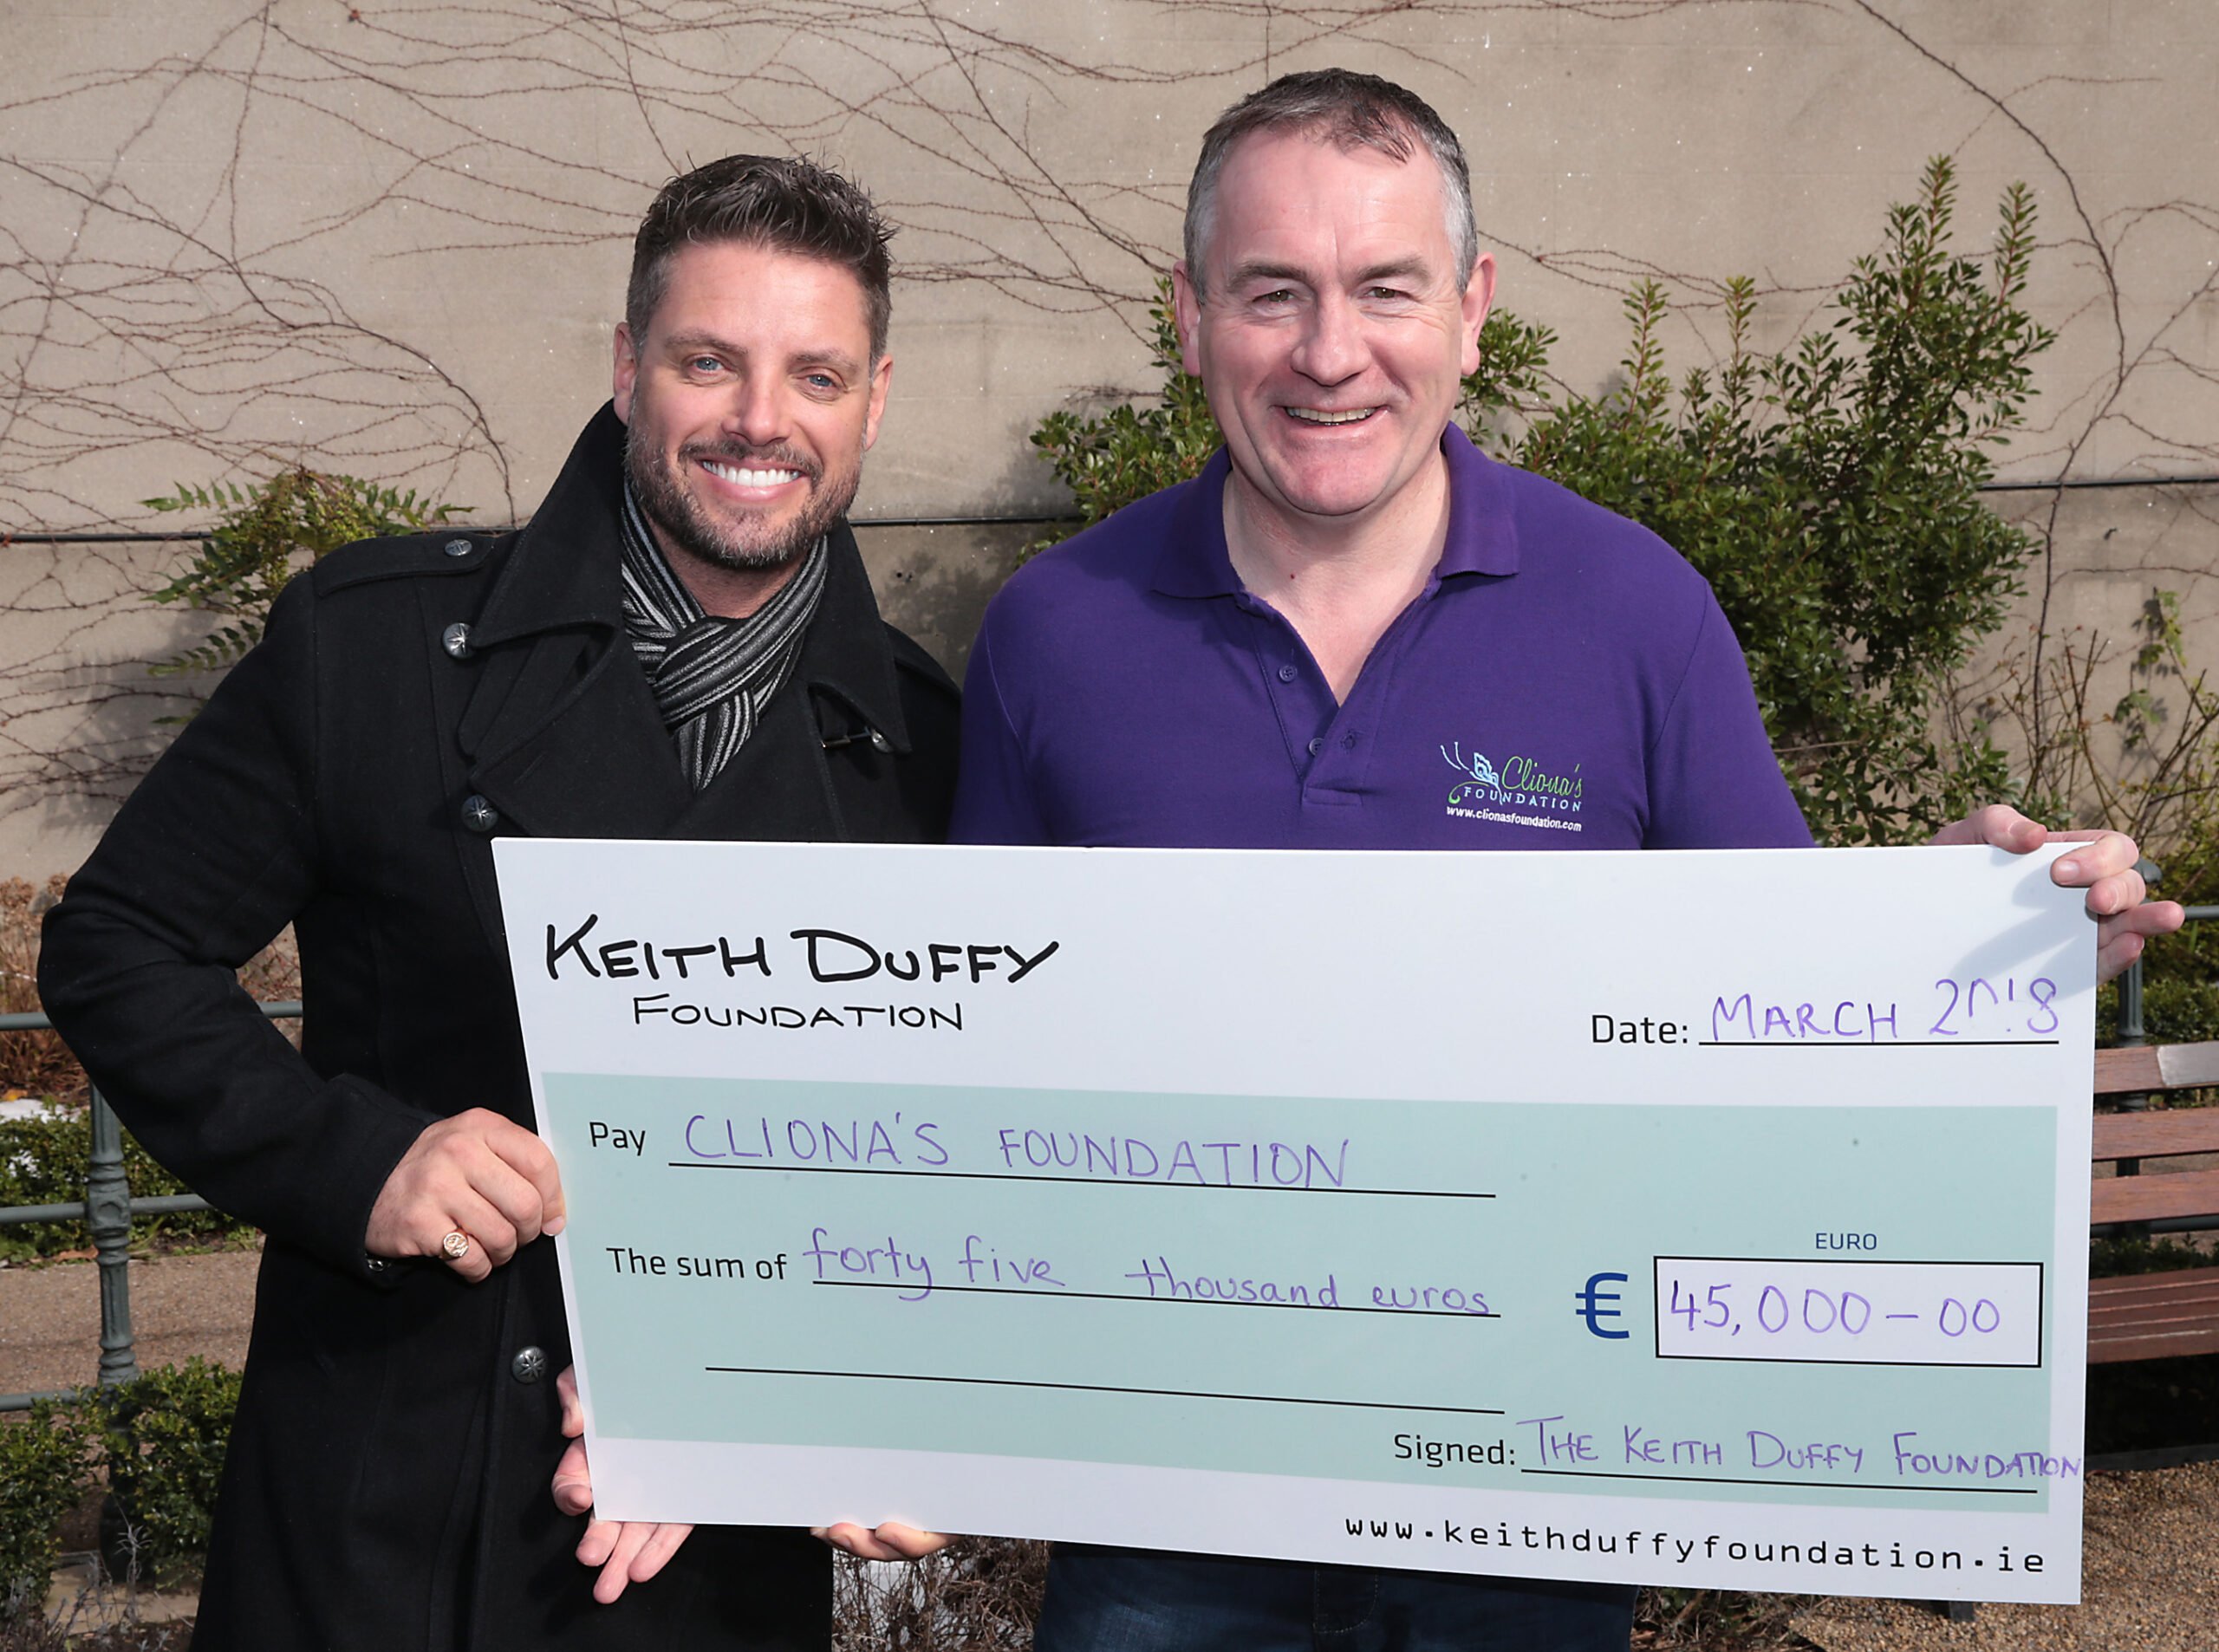 Keith Duffy and Brendan Ring raising funds for families with sick children. Charity Ireland.